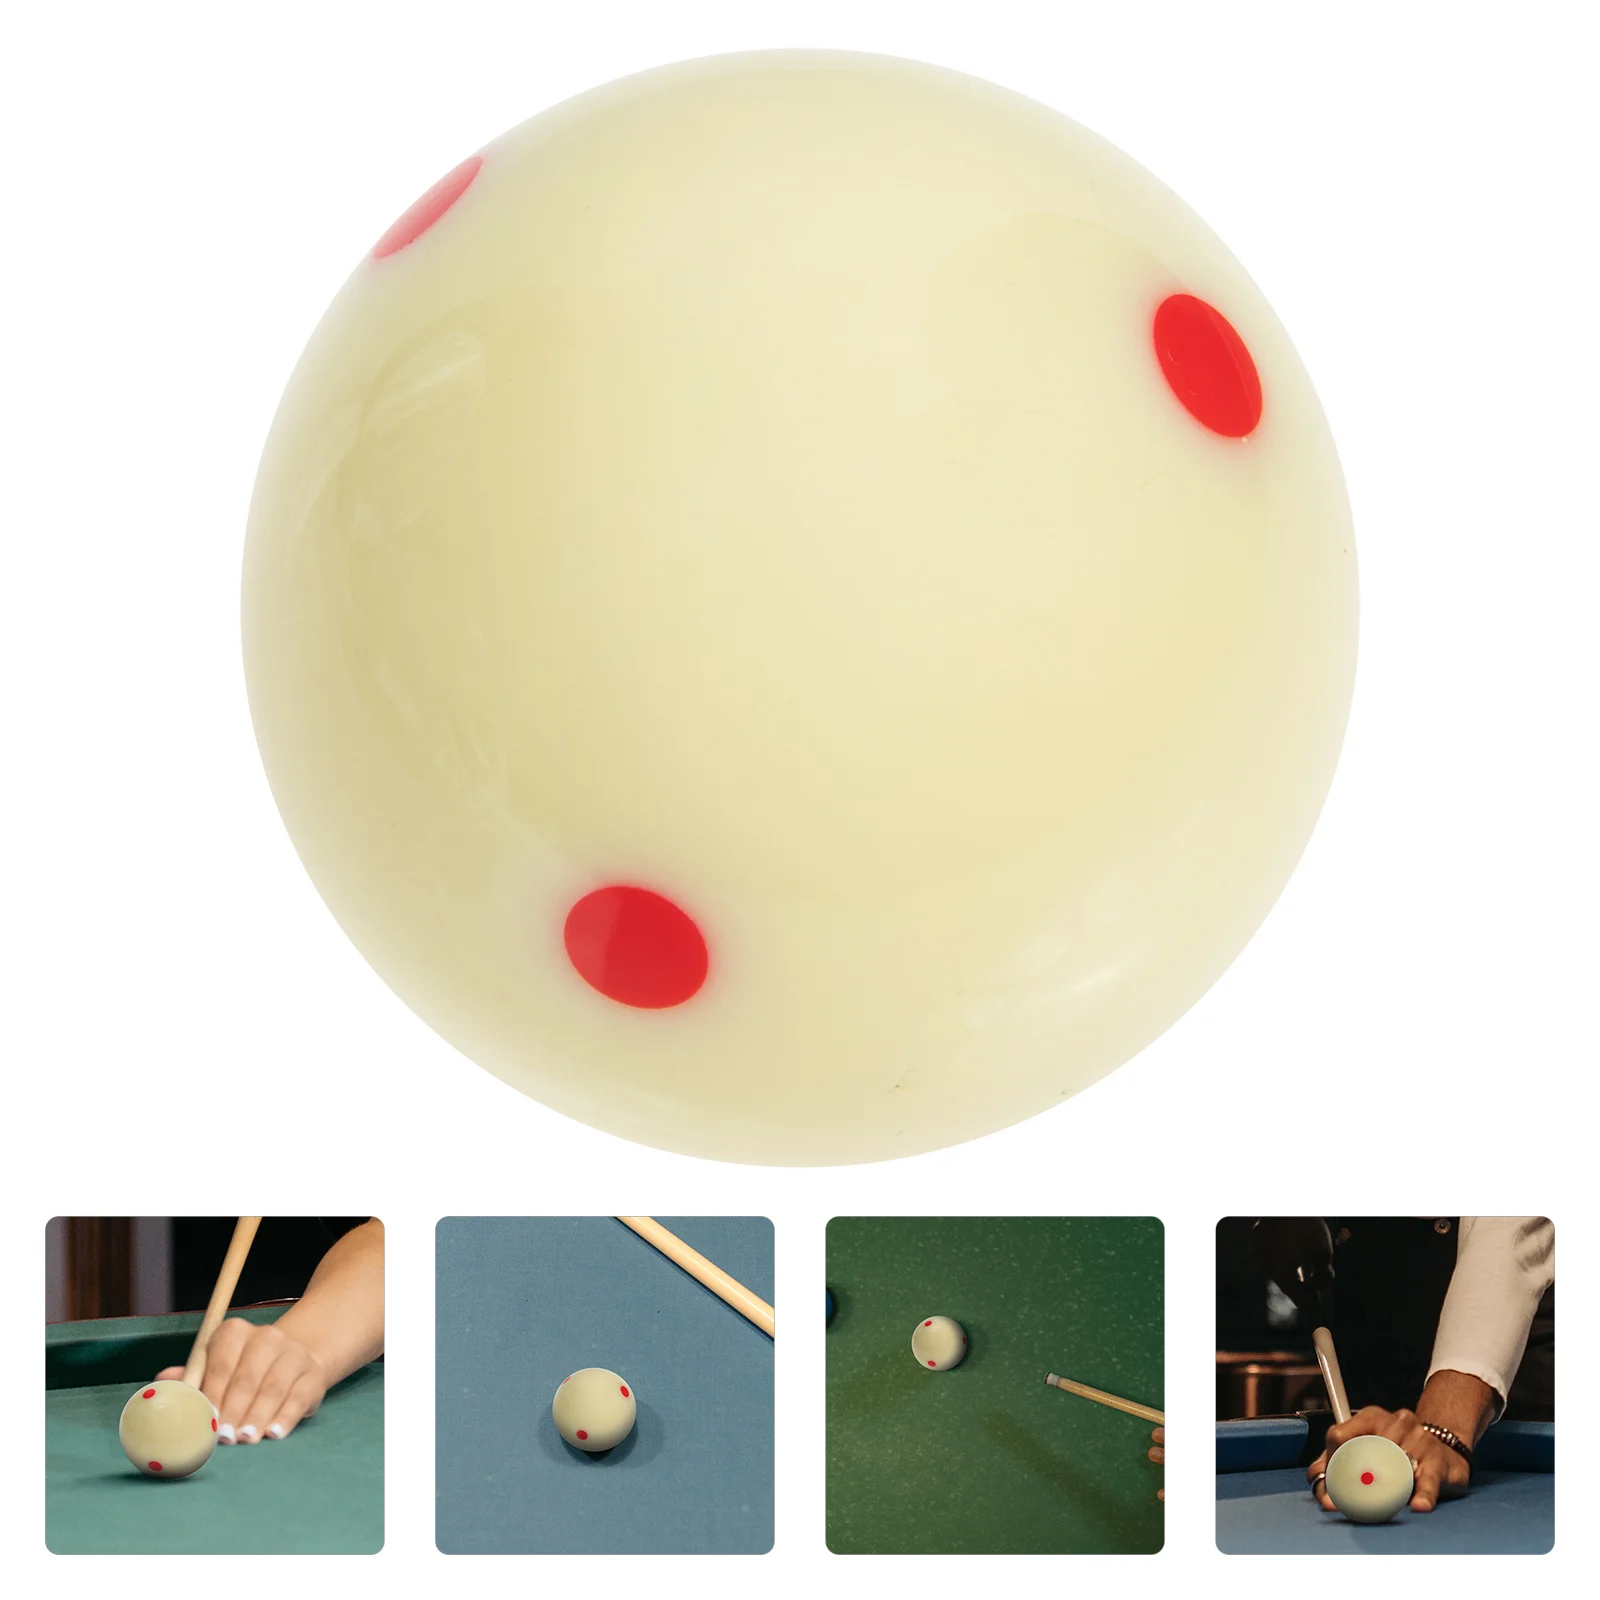 

Billiard White Ball Snooker Cue Standard Six Dots Replaceable Pool Supply Resin Improve Practice Skills Professional Marbles